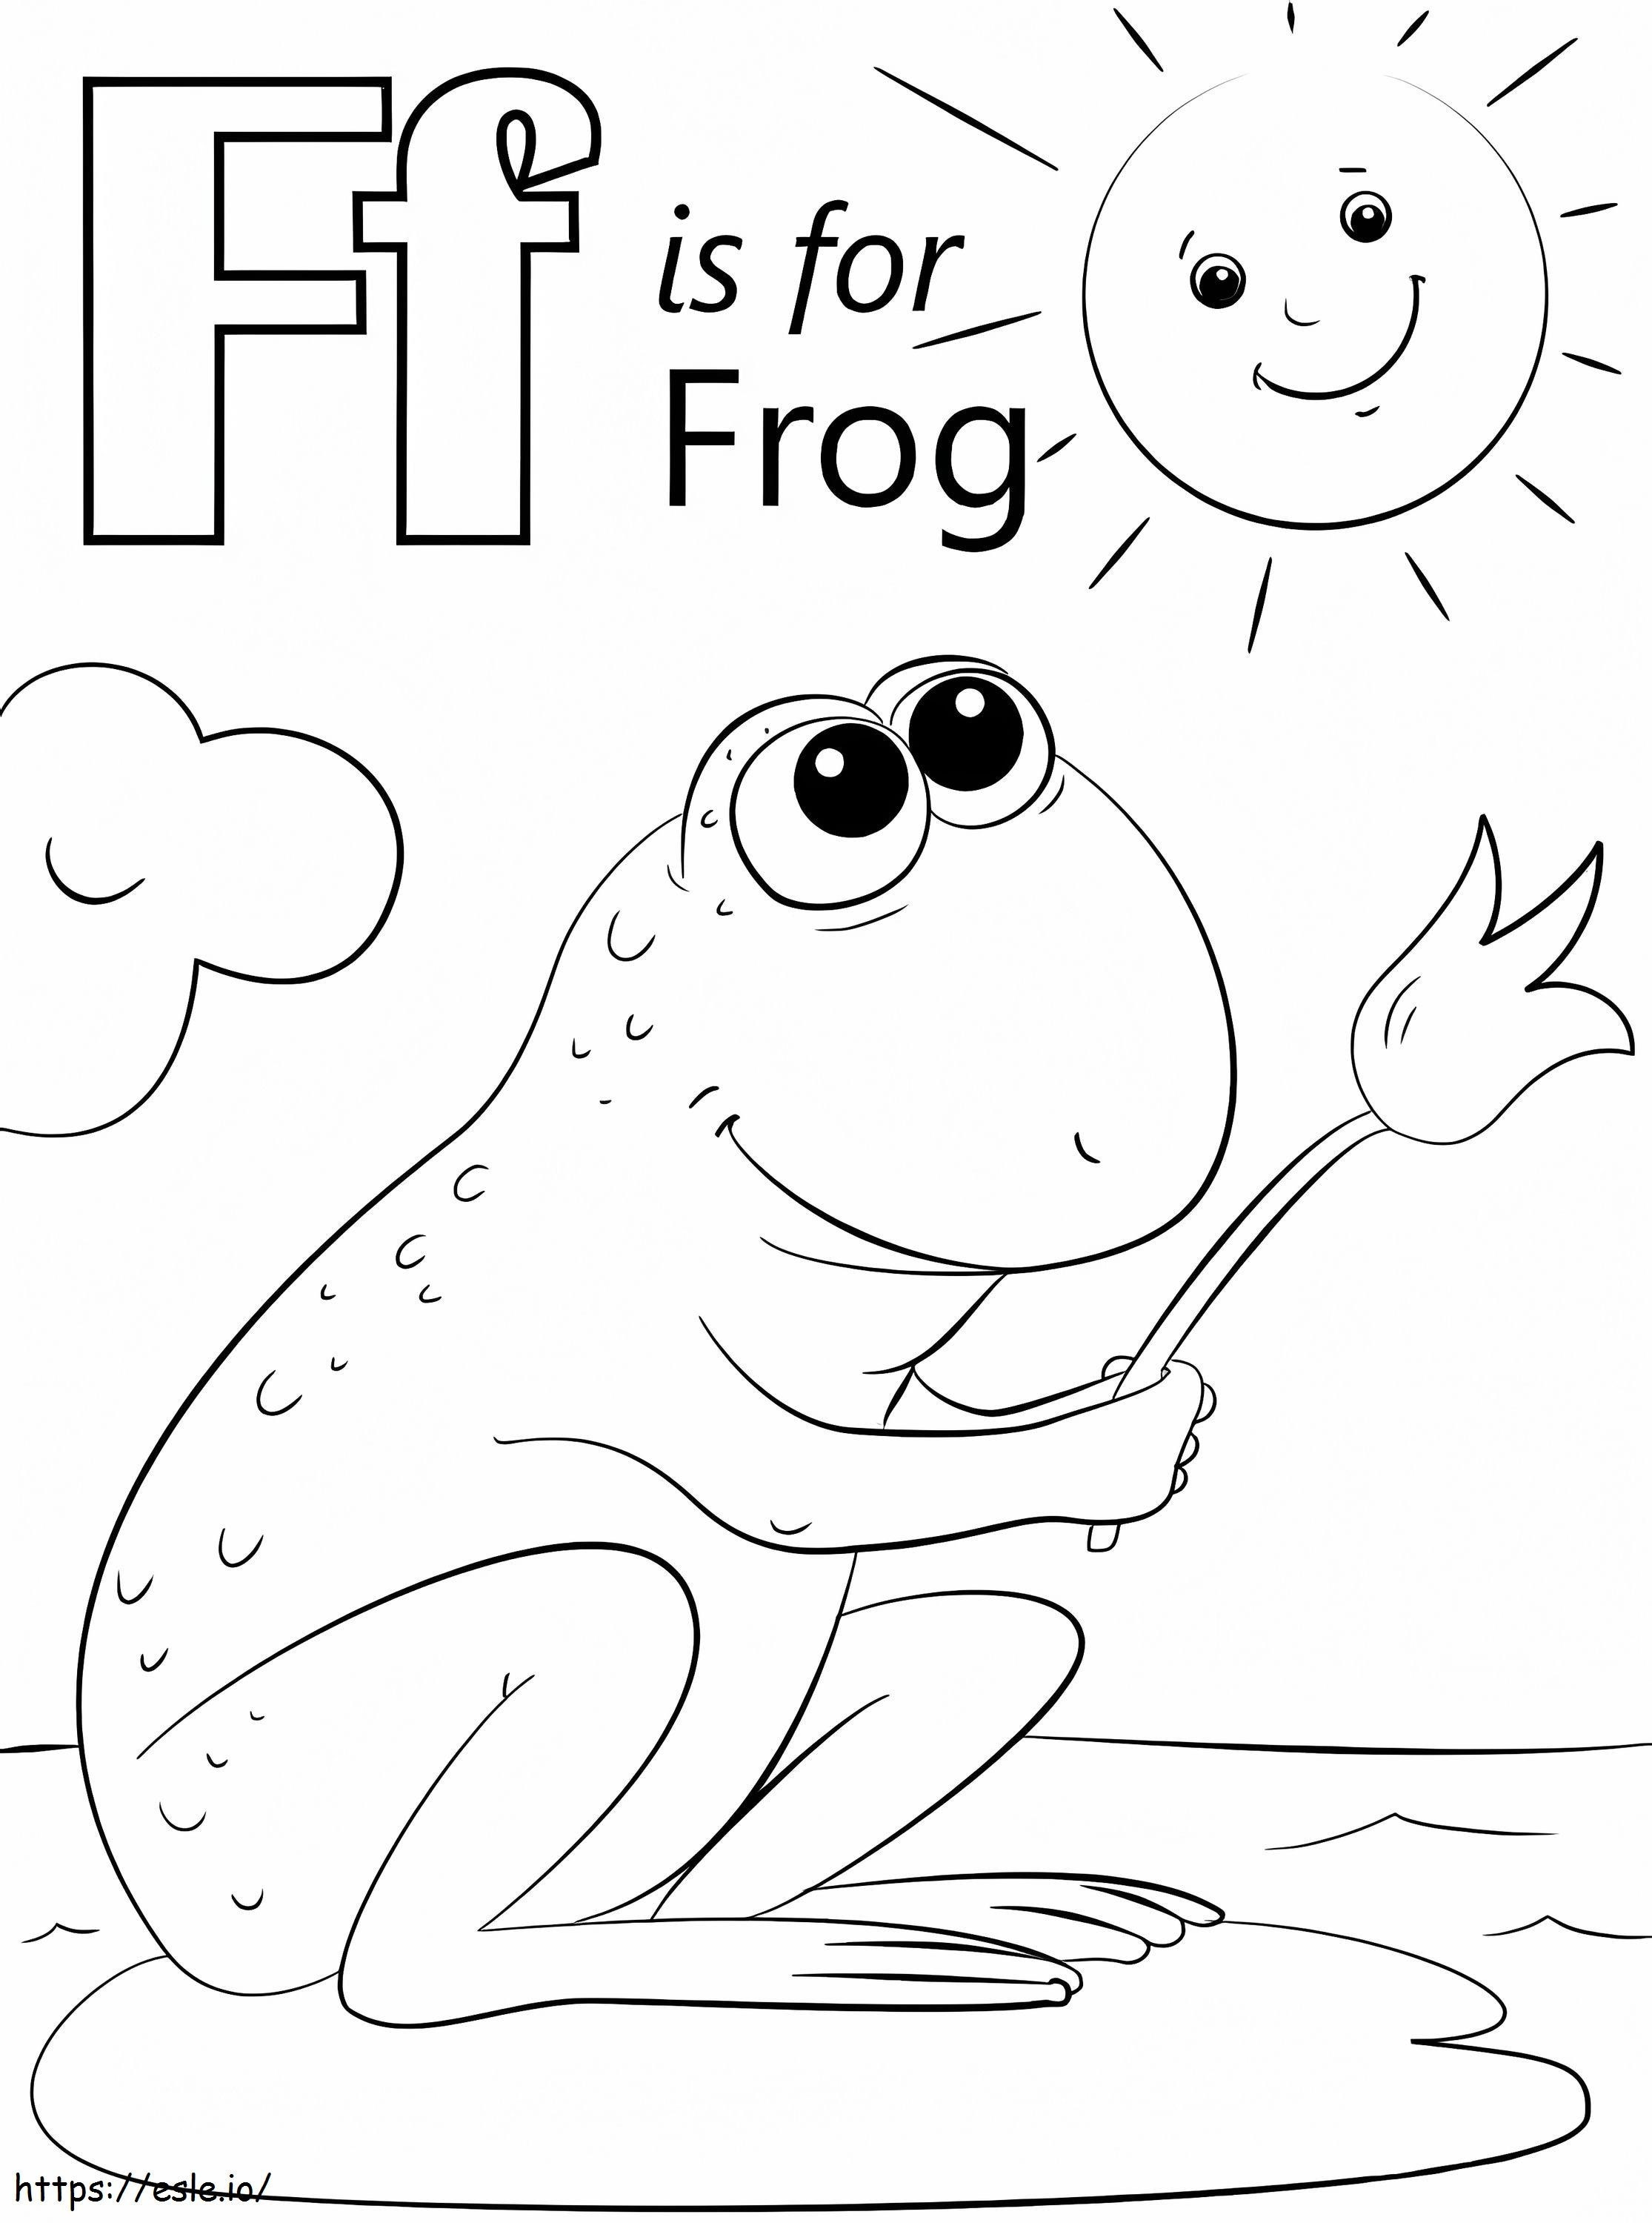 Frog Letter F coloring page